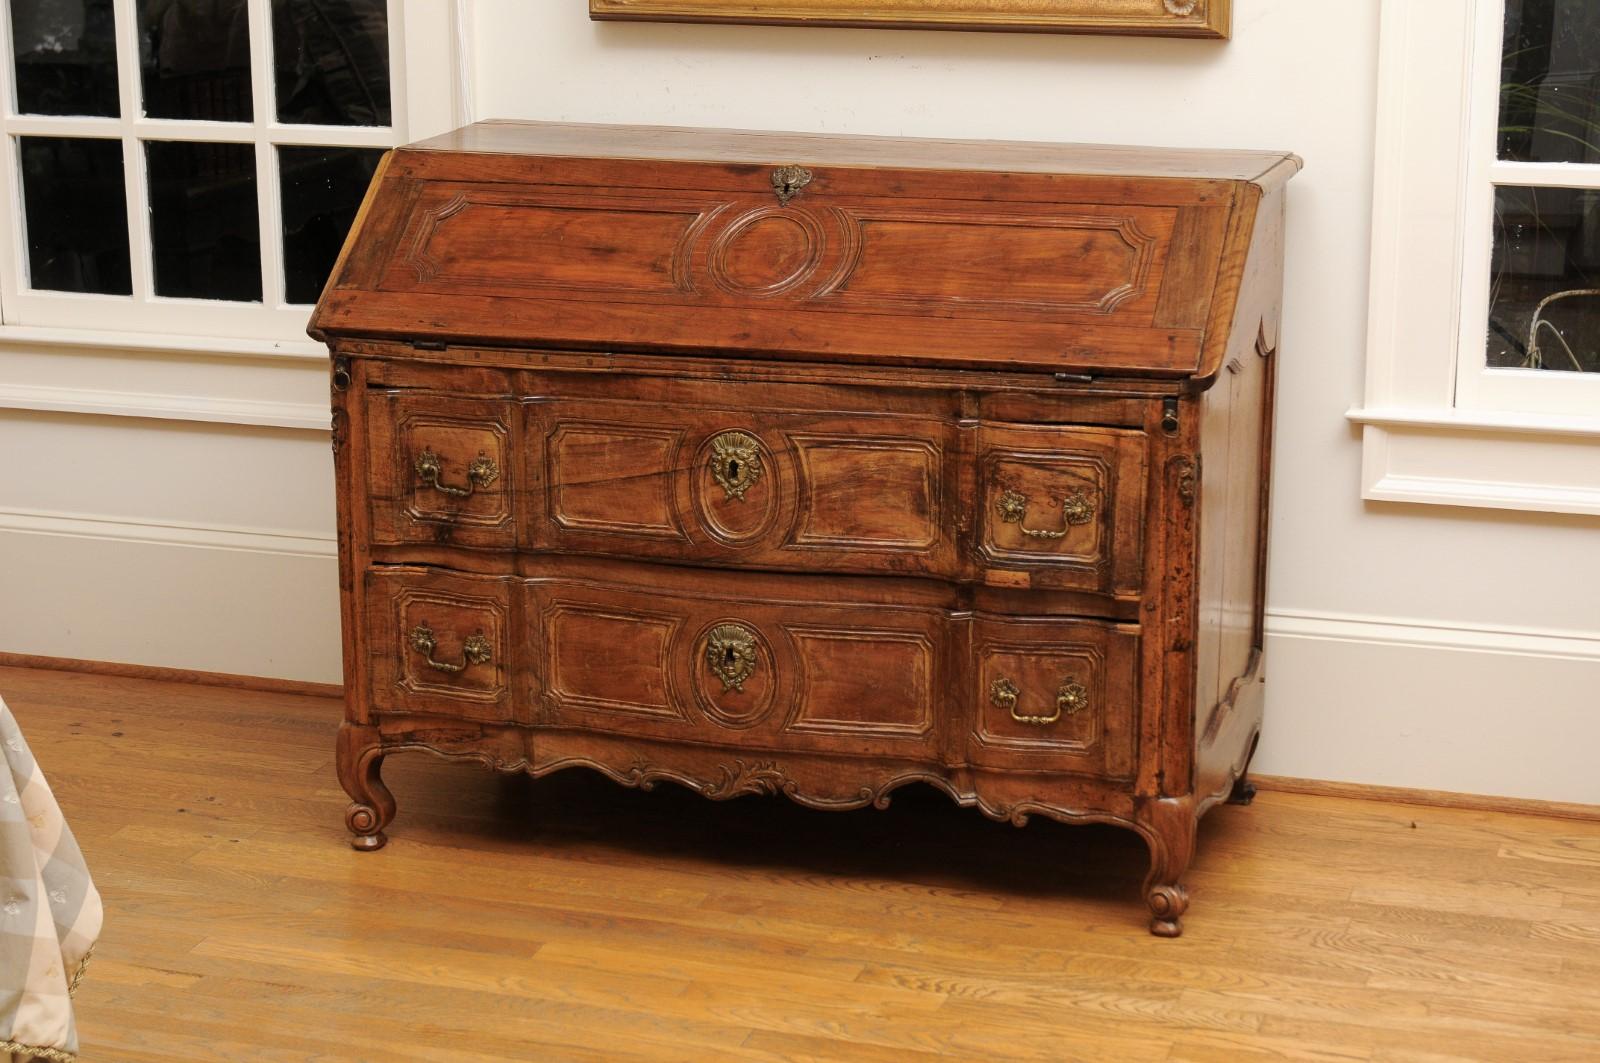 Carved French 1780s Transition Period Walnut Slant Front Desk Commode with Drawers